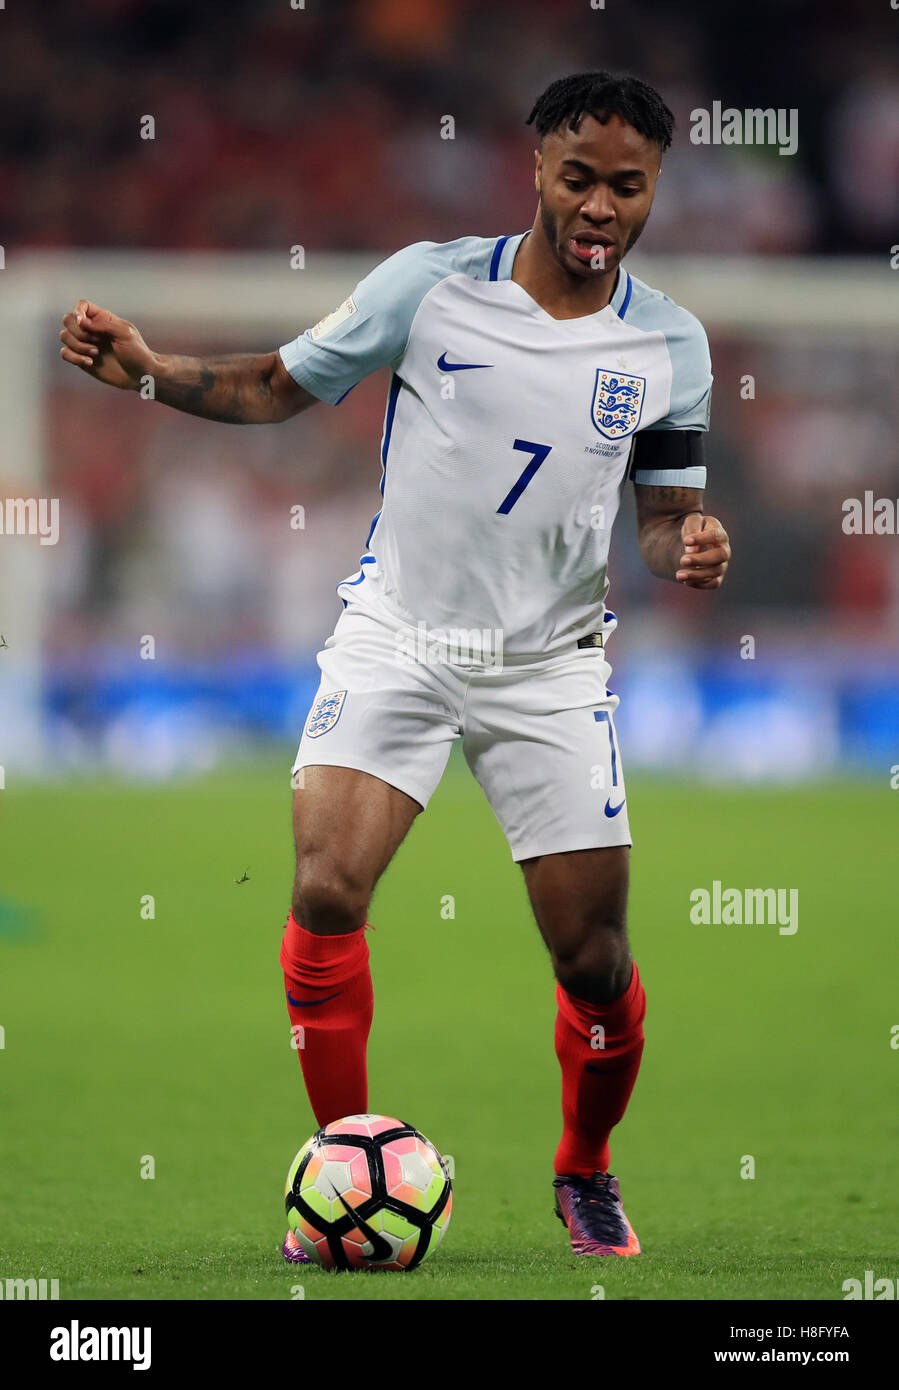 England's Raheem Sterling during the 2018 FIFA World Cup qualifying, Group F match at Wembley Stadium, London. PRESS ASSOCIATION Photo. Picture date: Friday November 11, 2016. See PA story SOCCER England. Photo credit should read: Mike Egerton/PA Wire. RESTRICTIONS: Use subject to FA restrictions. Editorial use only. Commercial use only with prior written consent of the FA. No editing except cropping. Stock Photo